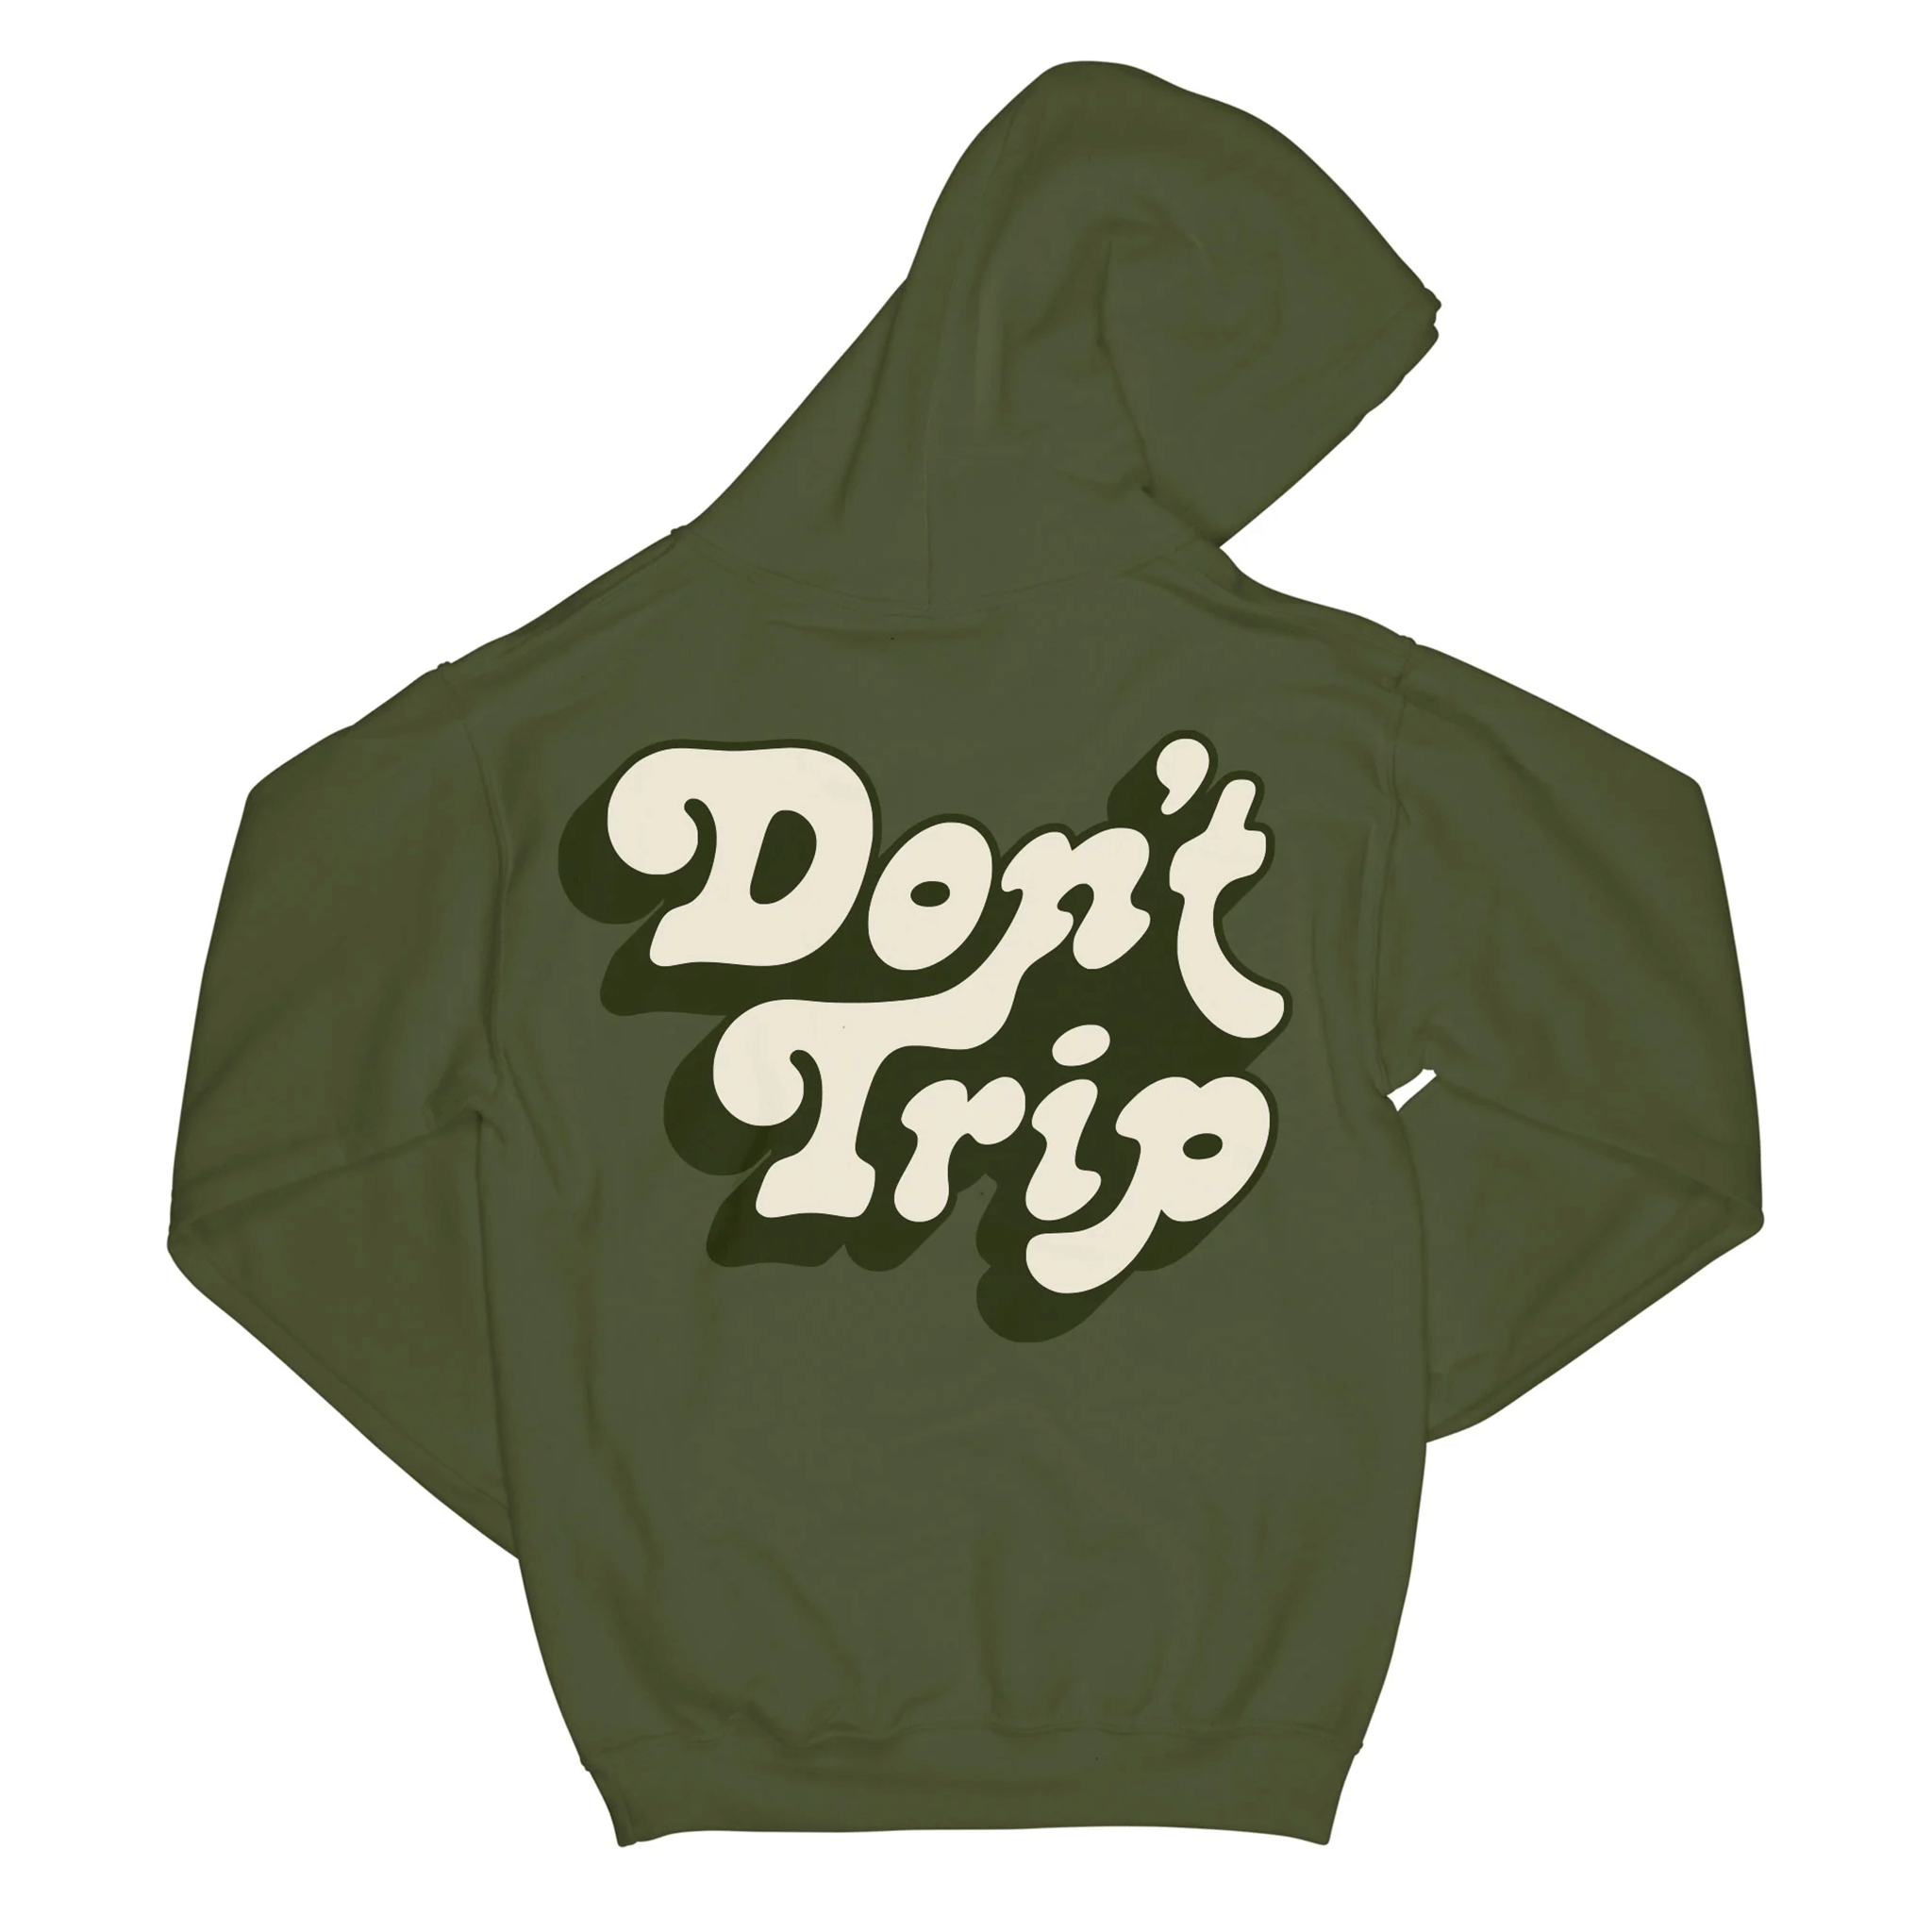 On a white background is a green sweatshirt hoodie with ivory text on the back that reads, "Don't Trip".